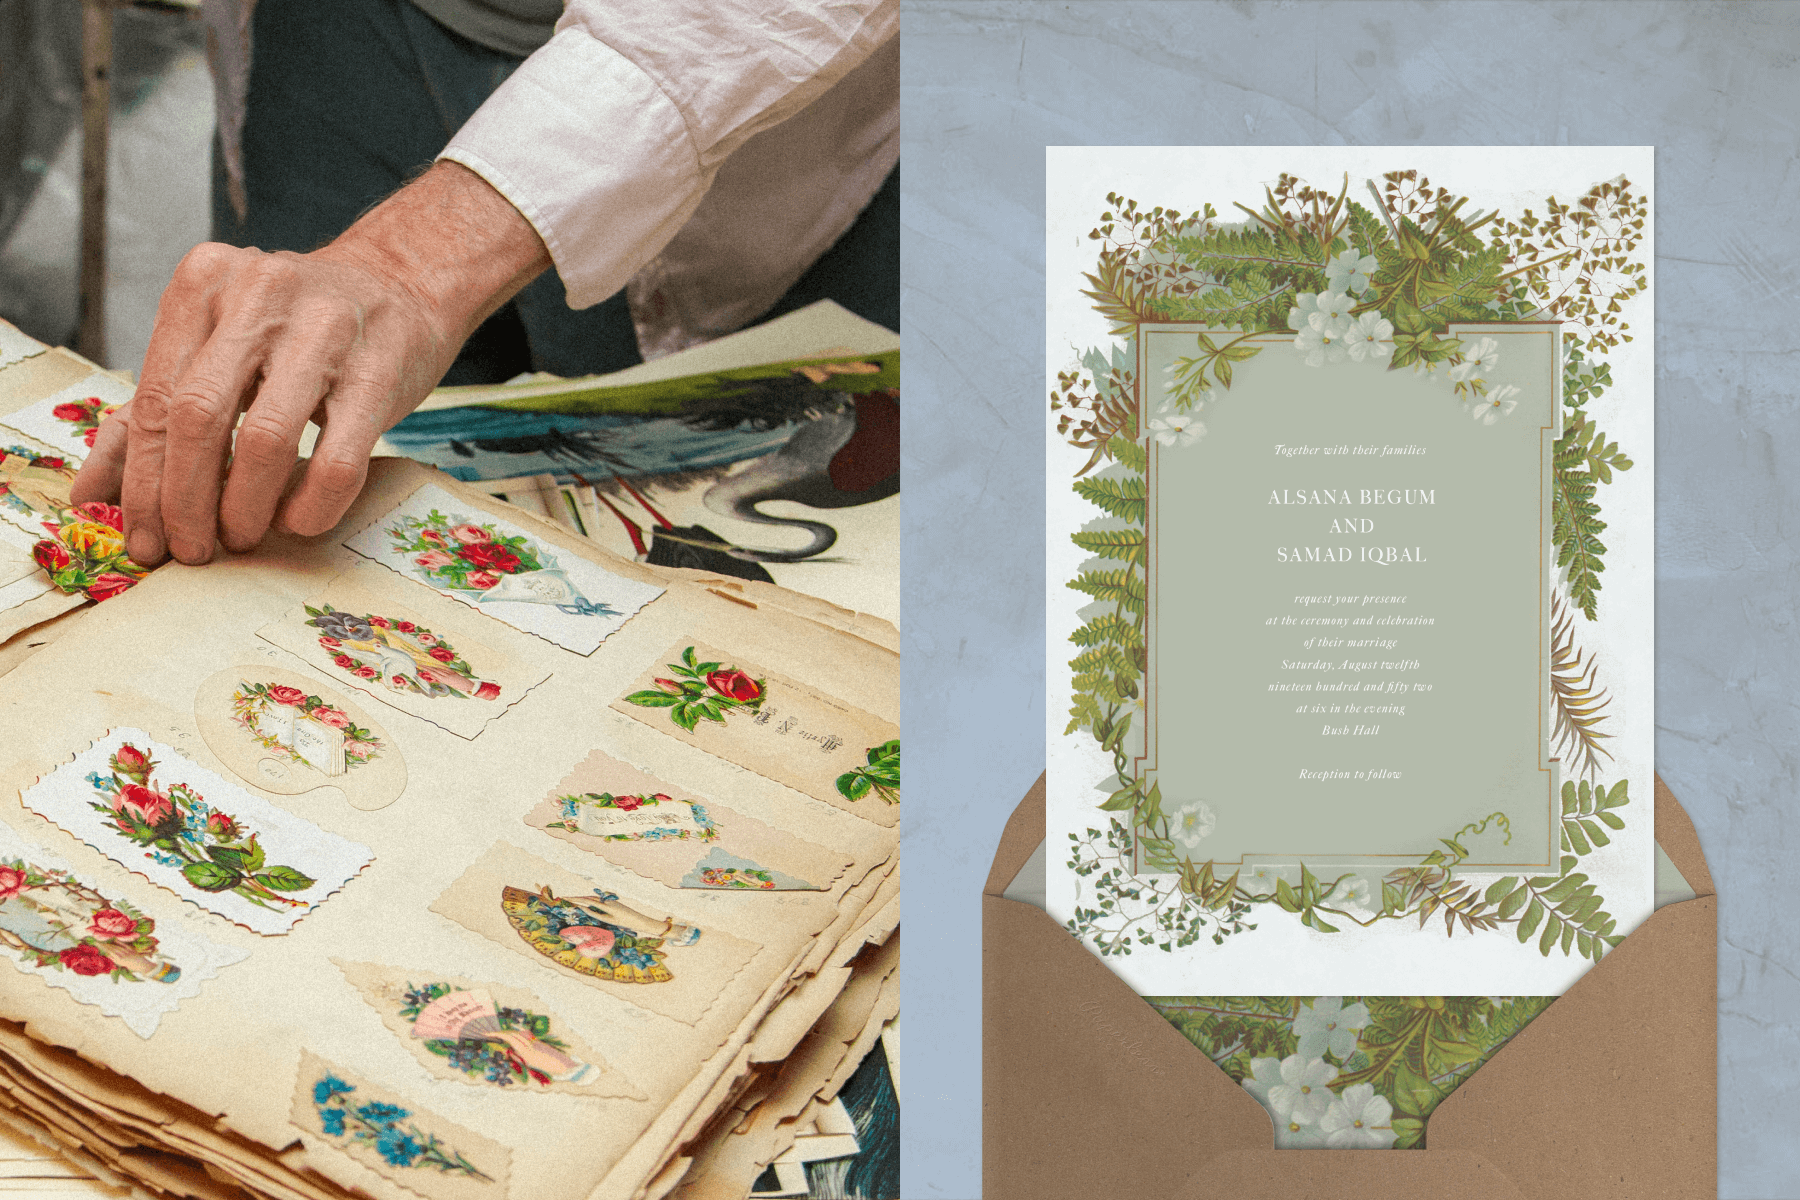 Left: Inside John Derian's studio, a book filled with antique love letter cards illustrated with floral designs. Right: A wedding invitation with a floral and fern-filled illustrated border, paired with a brown paper envelope lined with a similar floral design. 